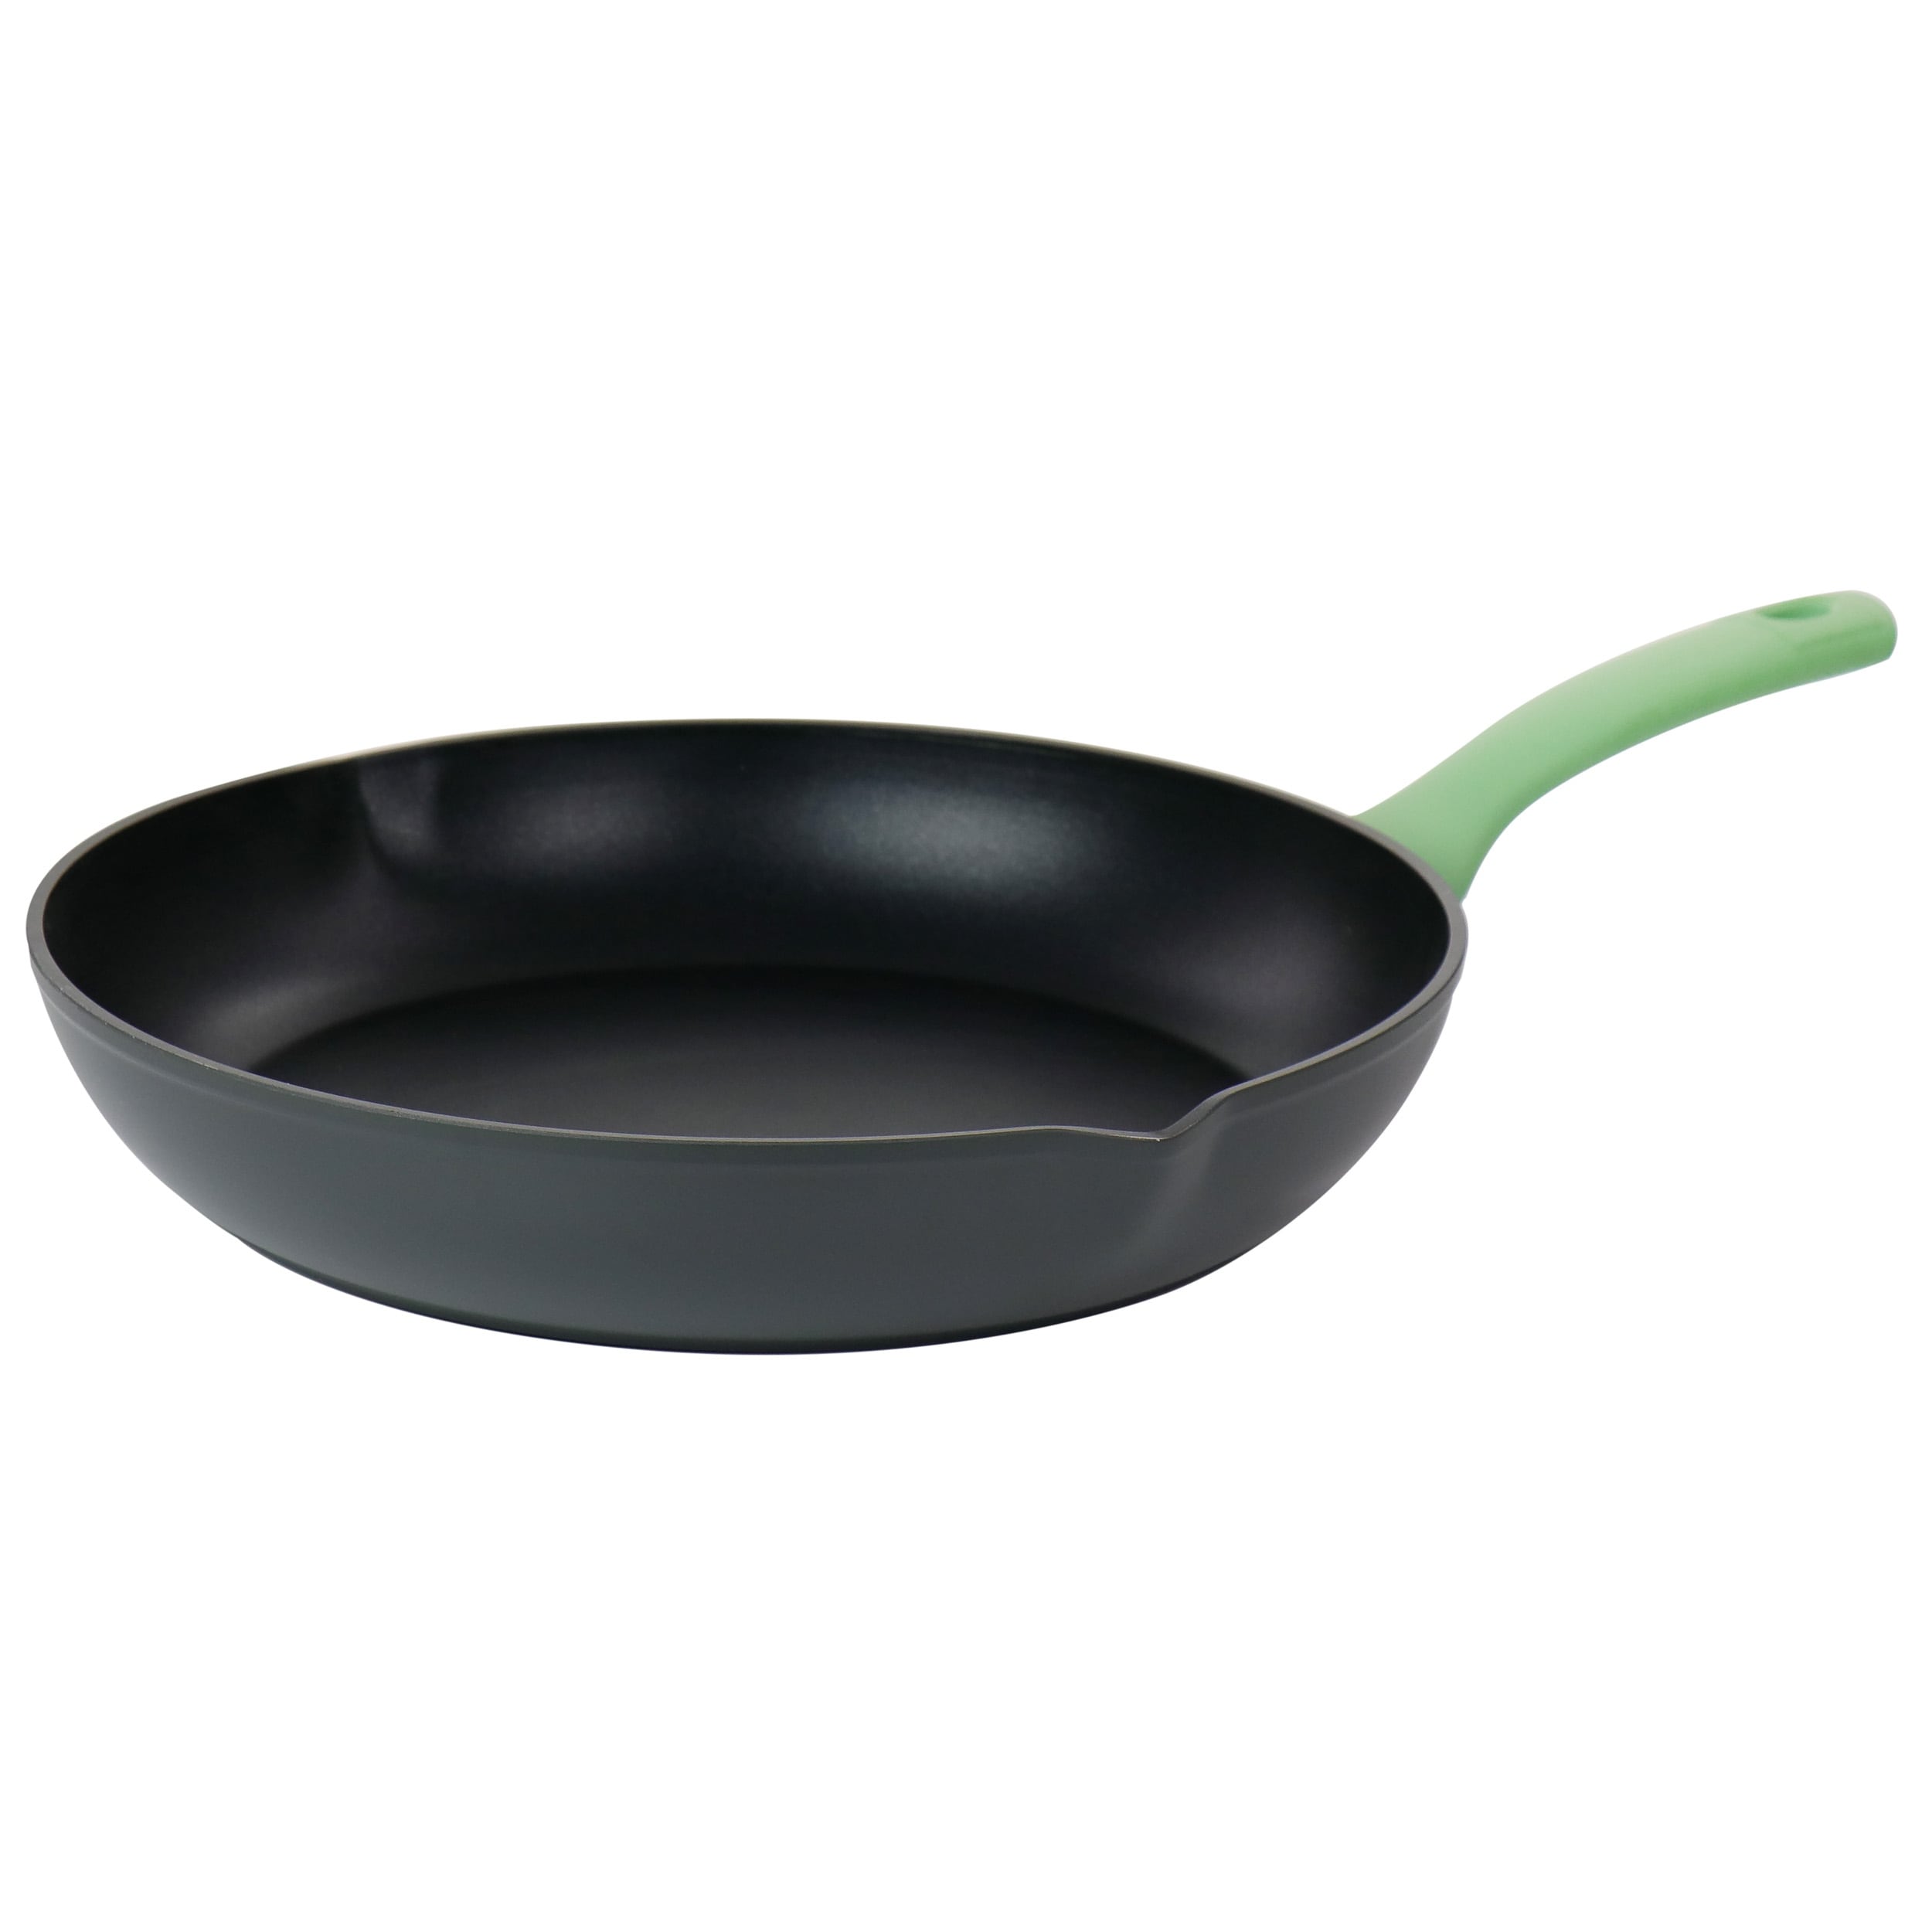 https://ak1.ostkcdn.com/images/products/is/images/direct/2c7ffaf32a0a6001cb2c948e6dd6dc709b03577c/Oster-Rigby-12In-Aluminum-Nonstick-Frying-Pan-in-Green.jpg